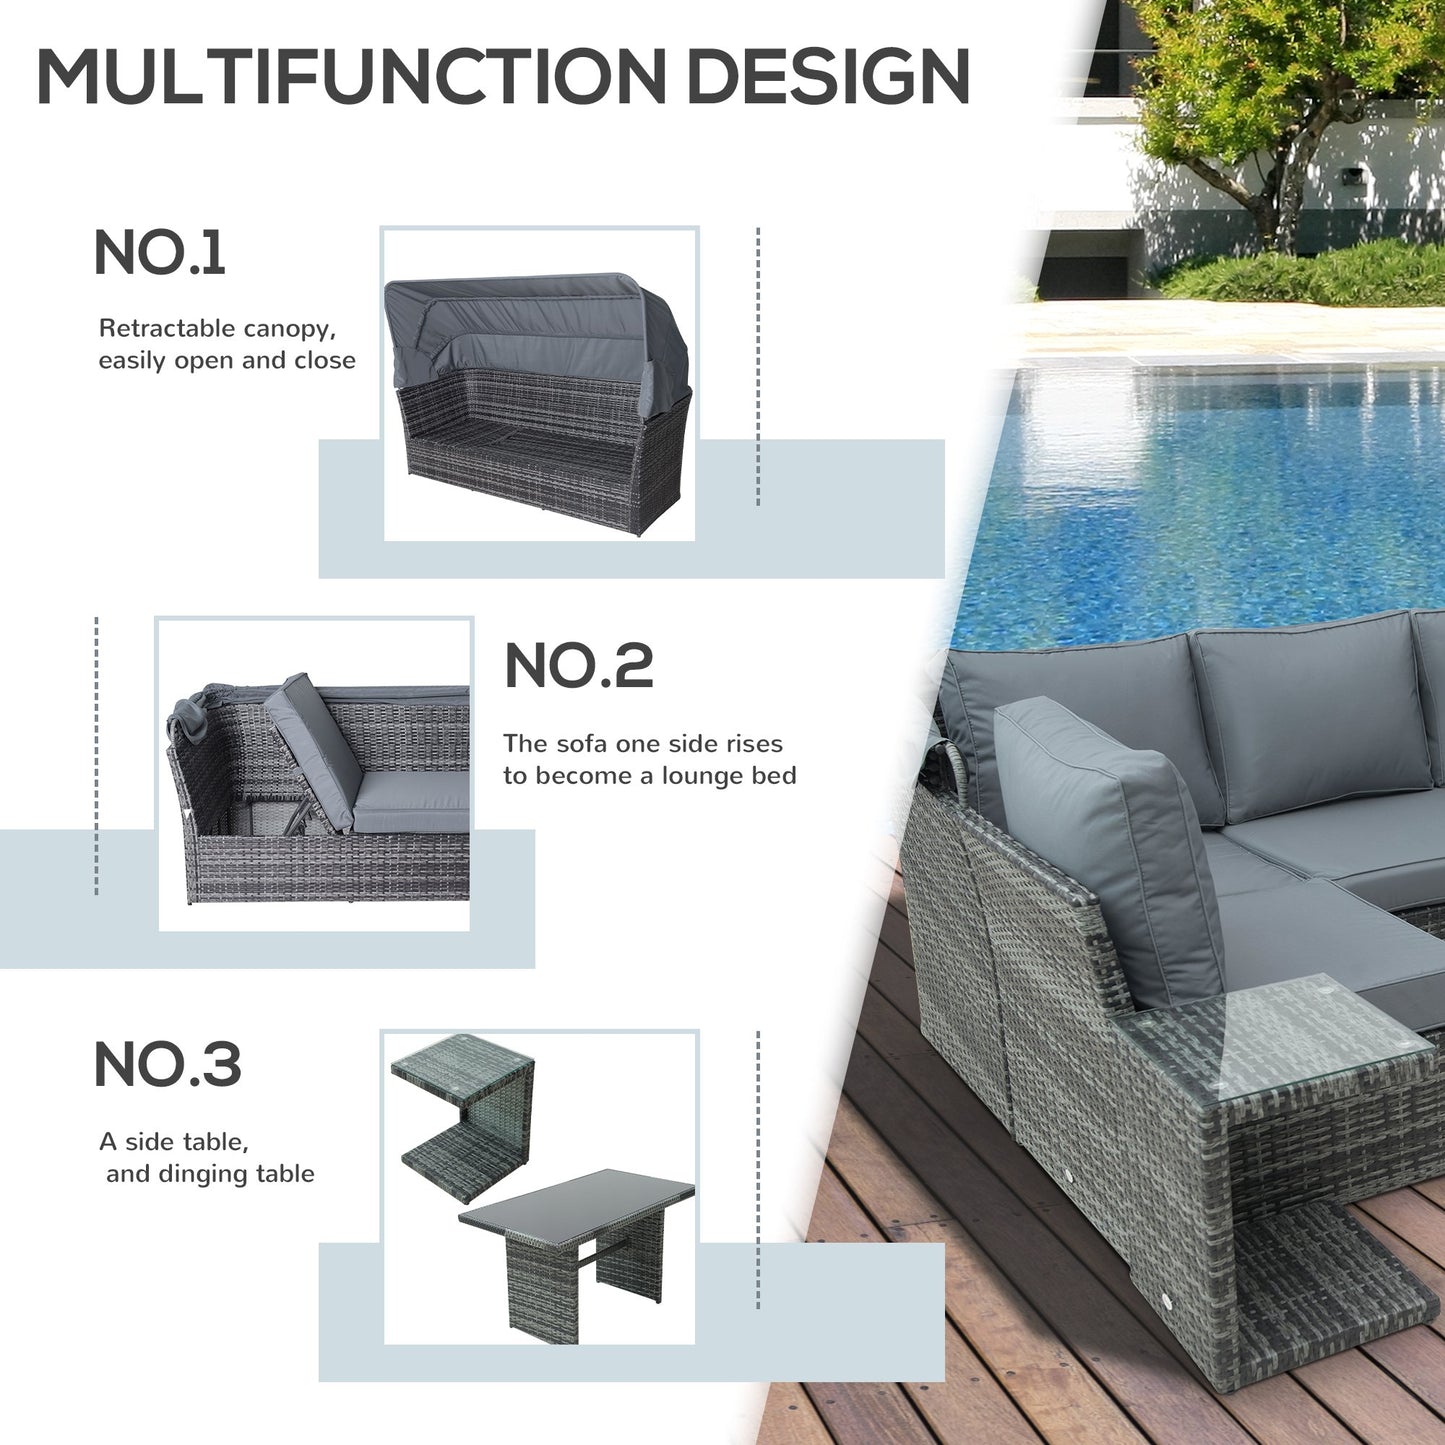 Outsunny 5 PCS Outdoor Rattan Sofa Sets Reclining Adjustable Canopy Side Dining Table with Cushions